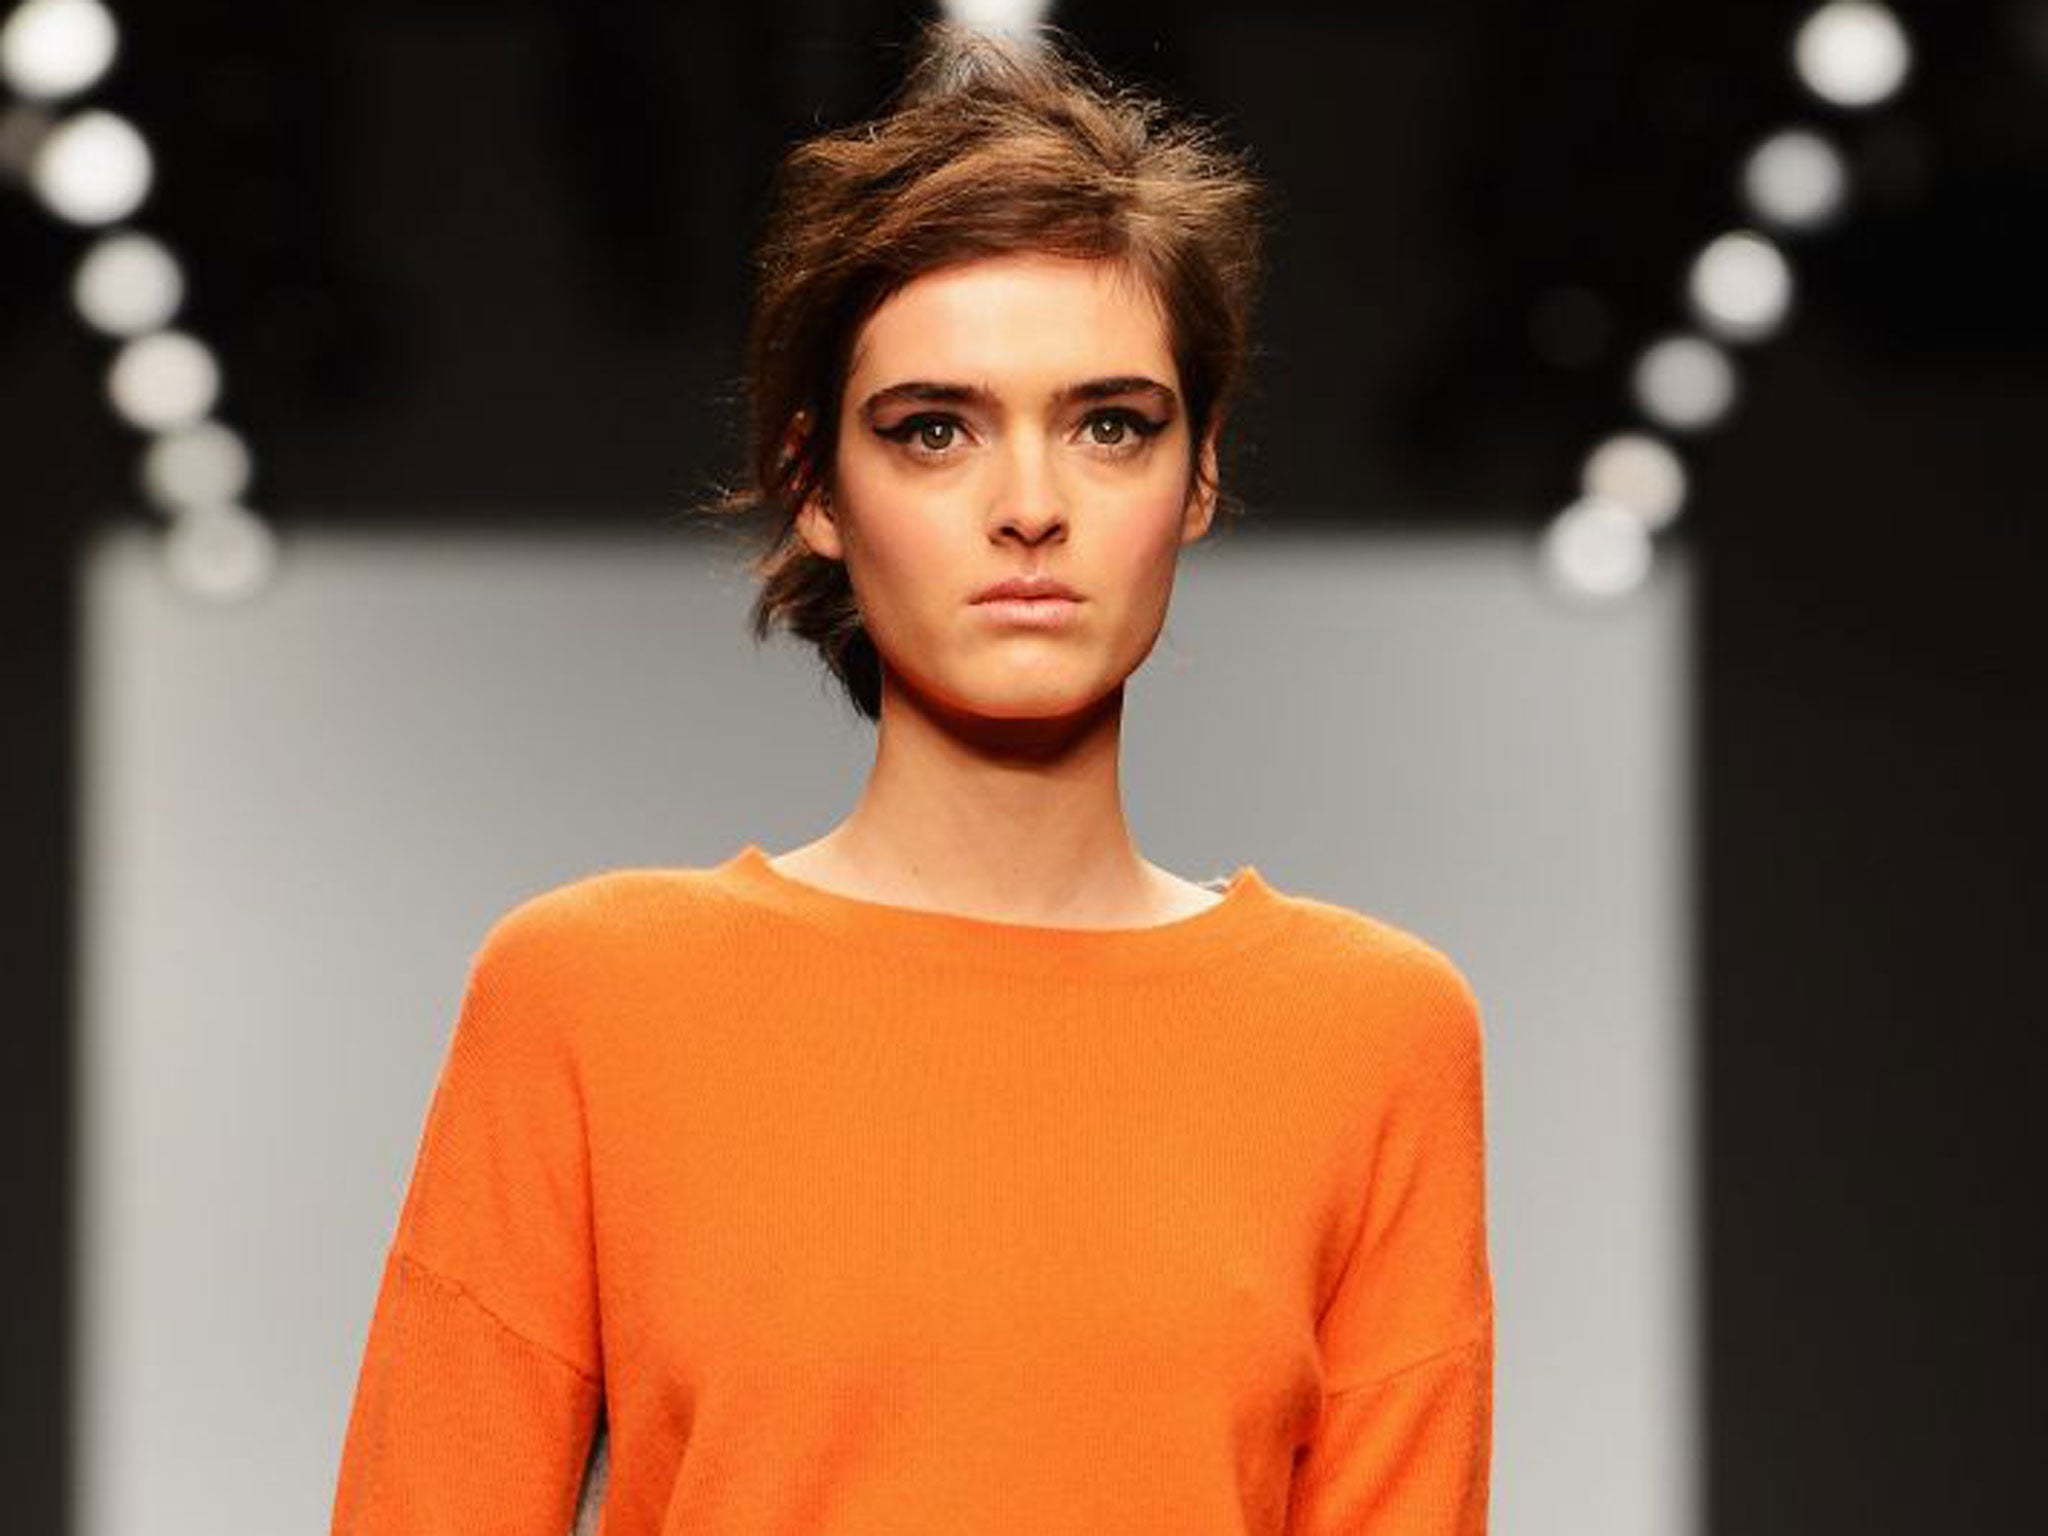 A model at Zoe Jordan’s show, which was the first at this year’s London Fashion Week